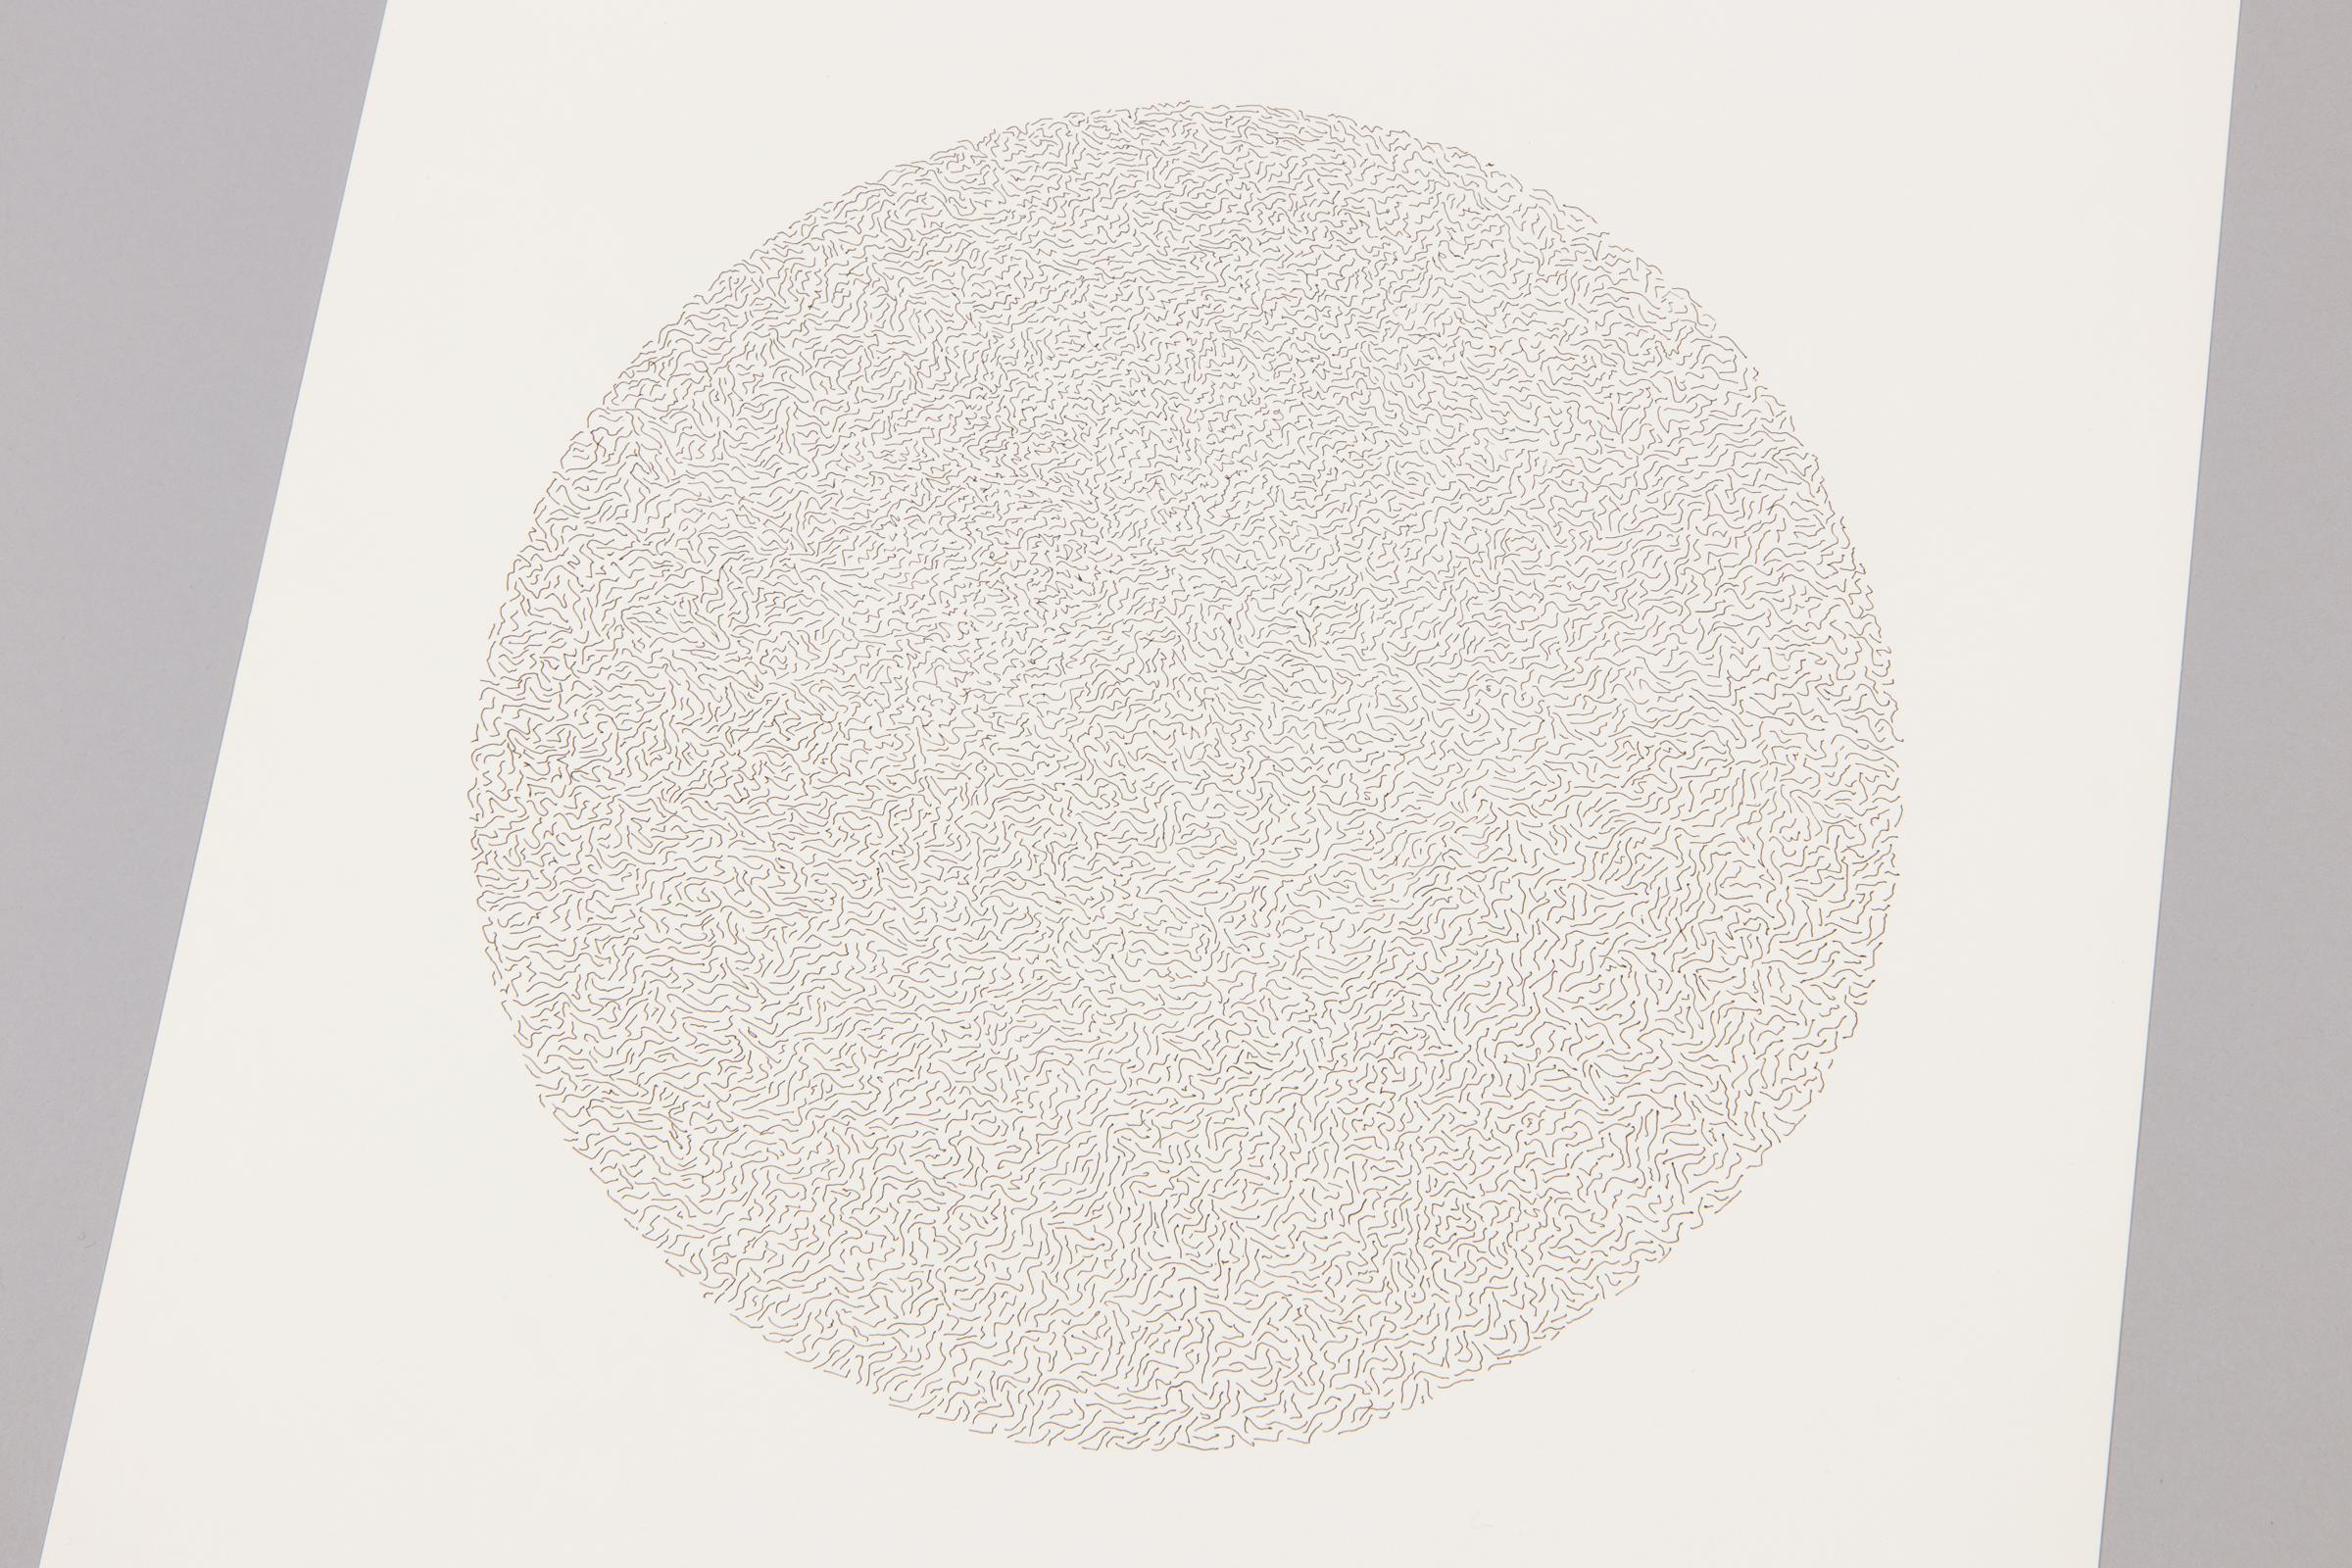 Sol LeWitt, Lines, Not Long, Not Heavy, Not Touching, Drawn at Random (Circle) For Sale 3